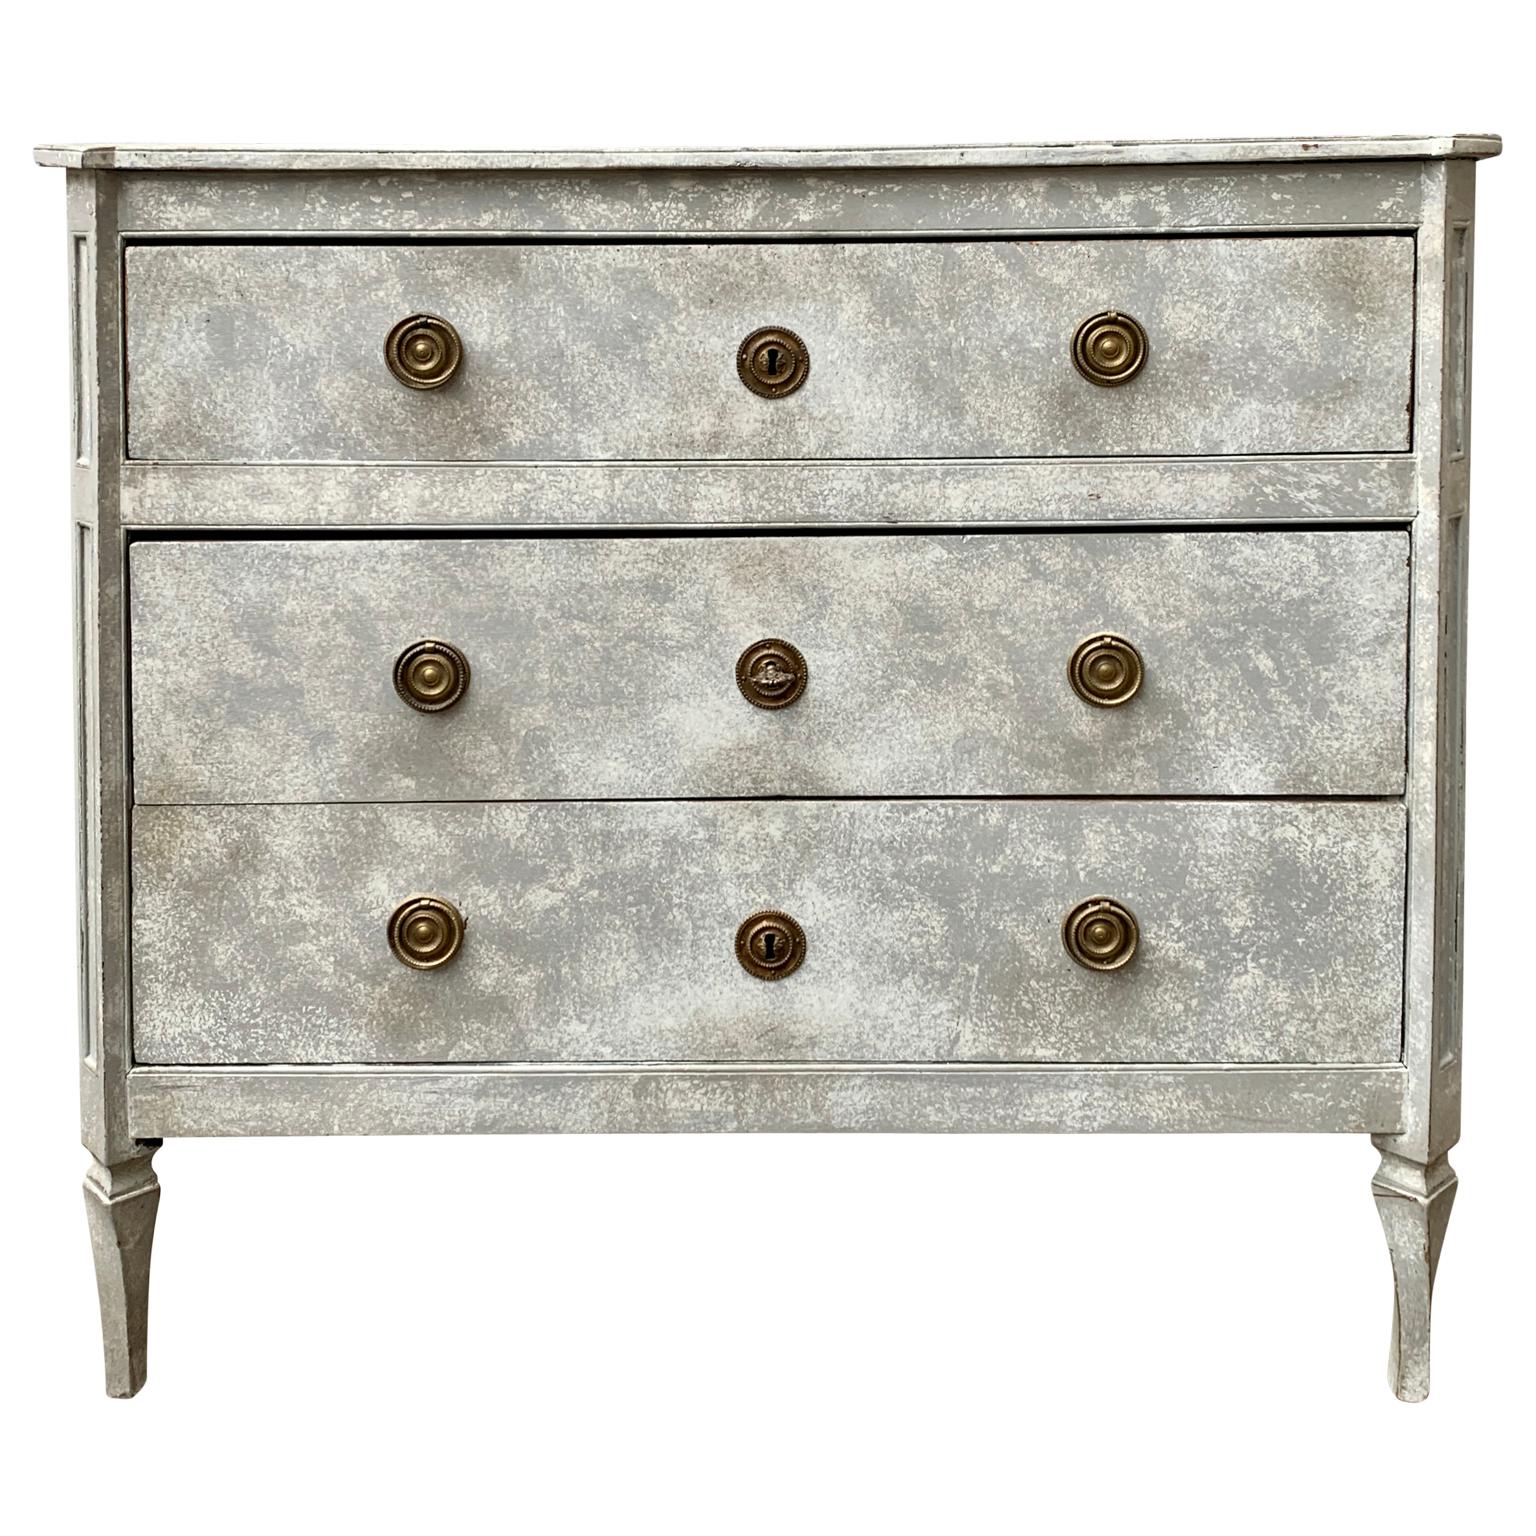 18th century Italian Louis XVI grey hand painted chest of drawers with brass handles. This Gustavian solid oak dresser from Northern Italy, most likely the Piemonte region, bordering France, features elegant twisted legs. The locks and key are in